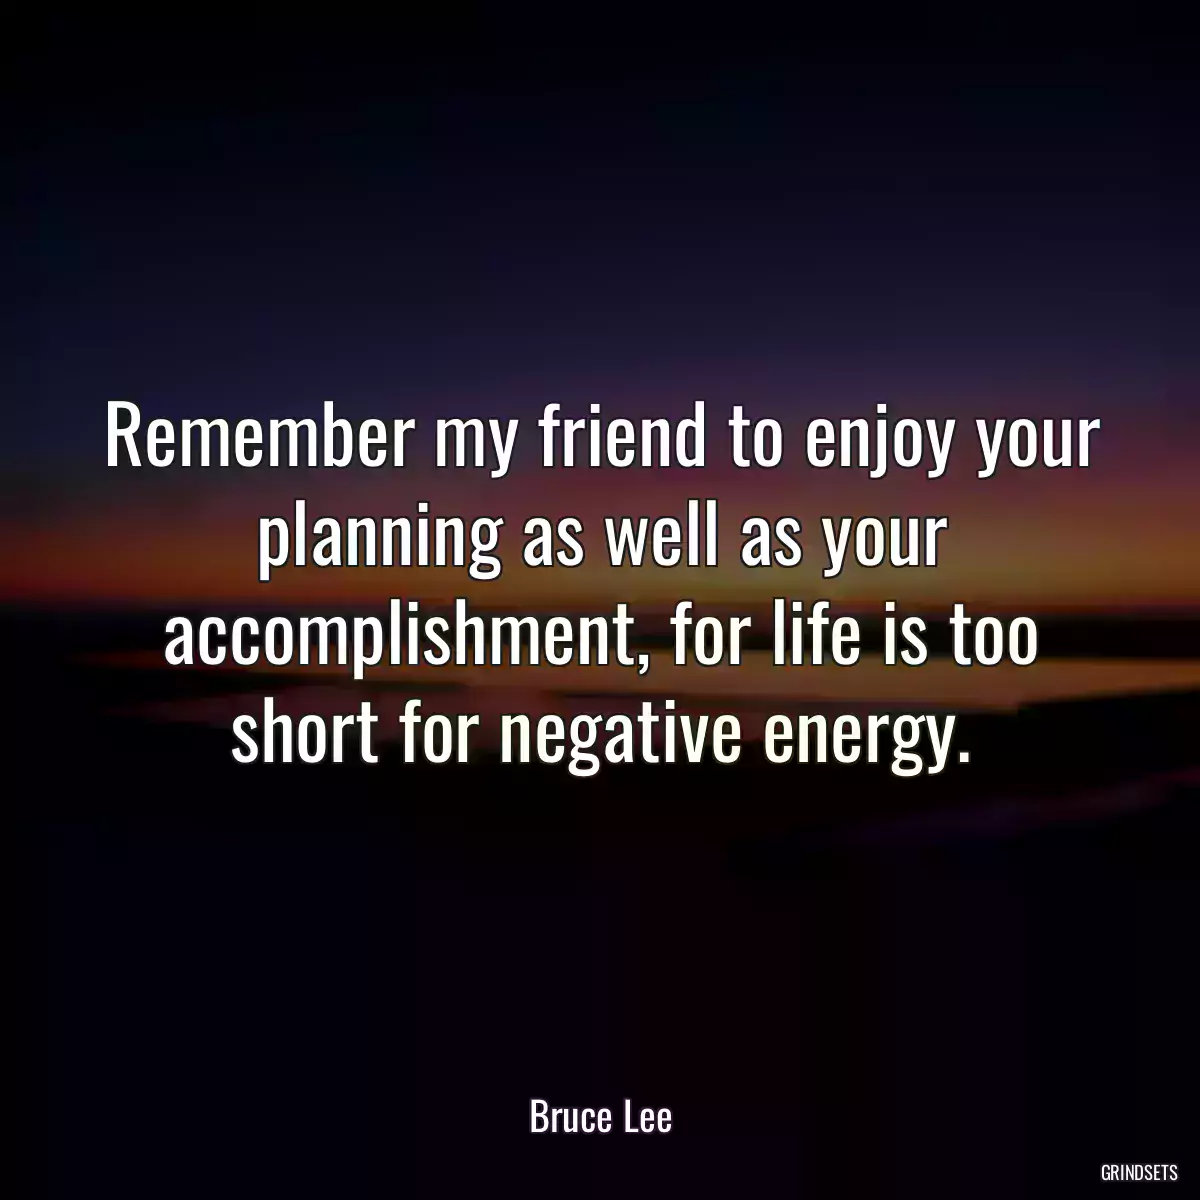 Remember my friend to enjoy your planning as well as your accomplishment, for life is too short for negative energy.